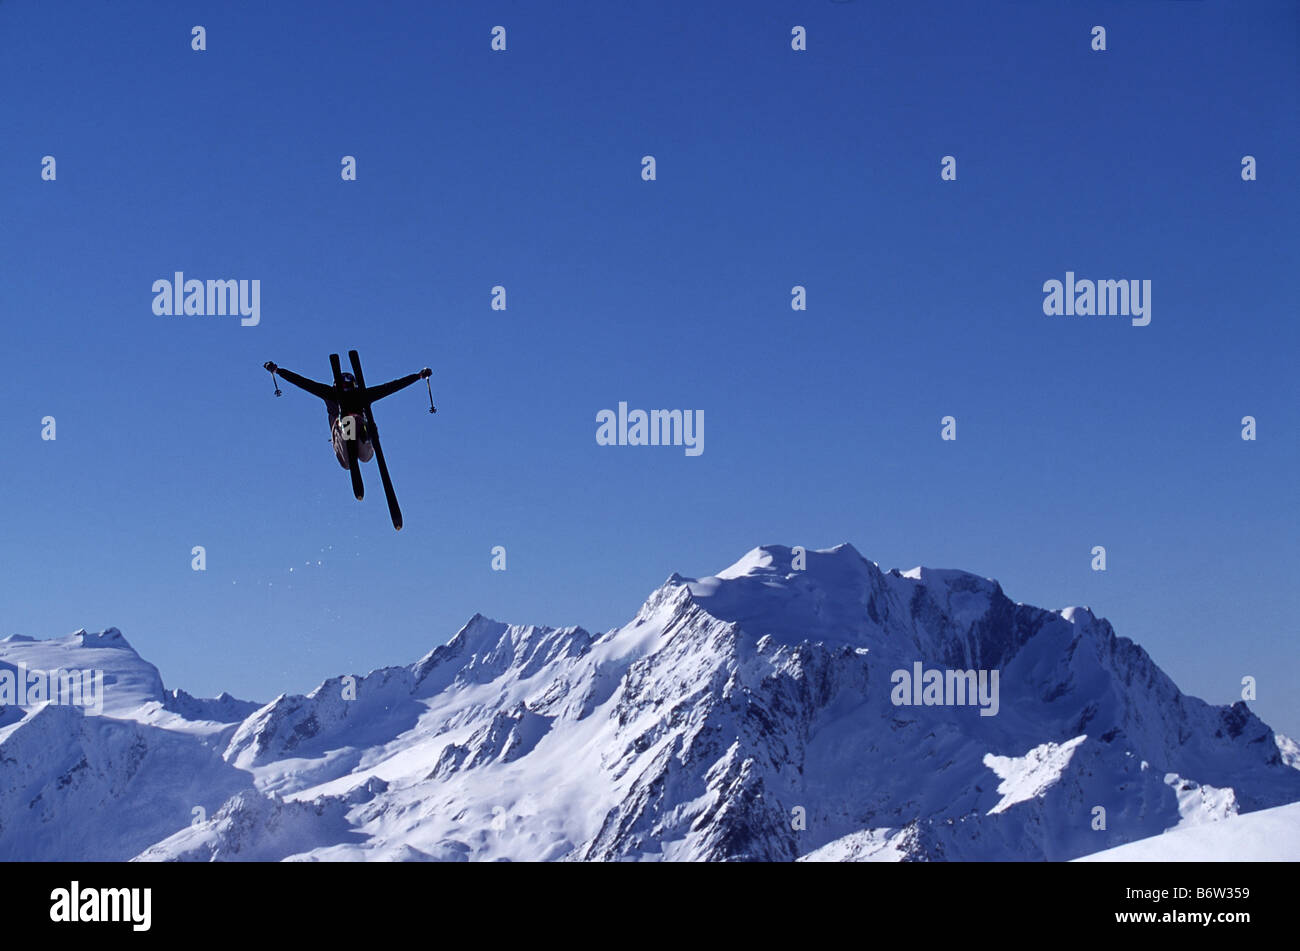 Skier jumping into the air with mountain backdrop Wonderland New Zealand Stock Photo